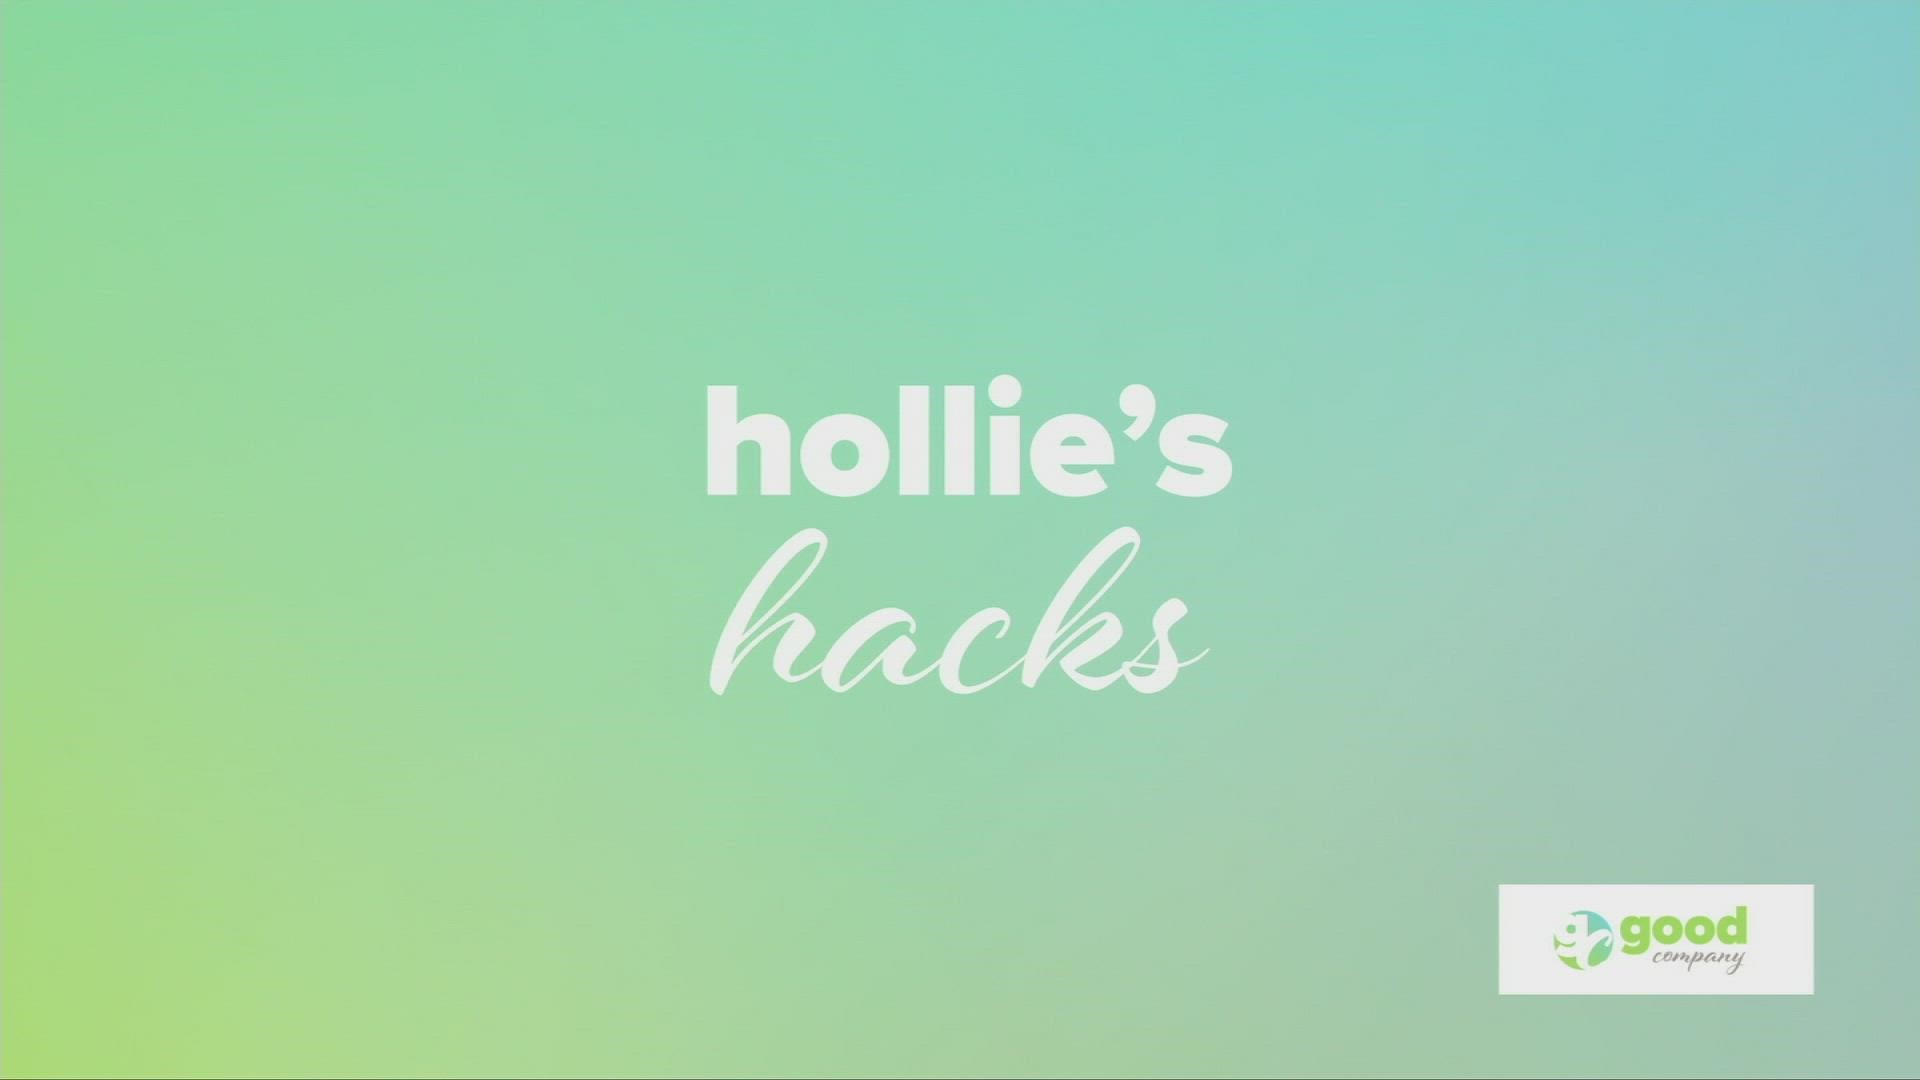 Hollie gives us a life hack for organizing all those sauces and bottles in our fridges!